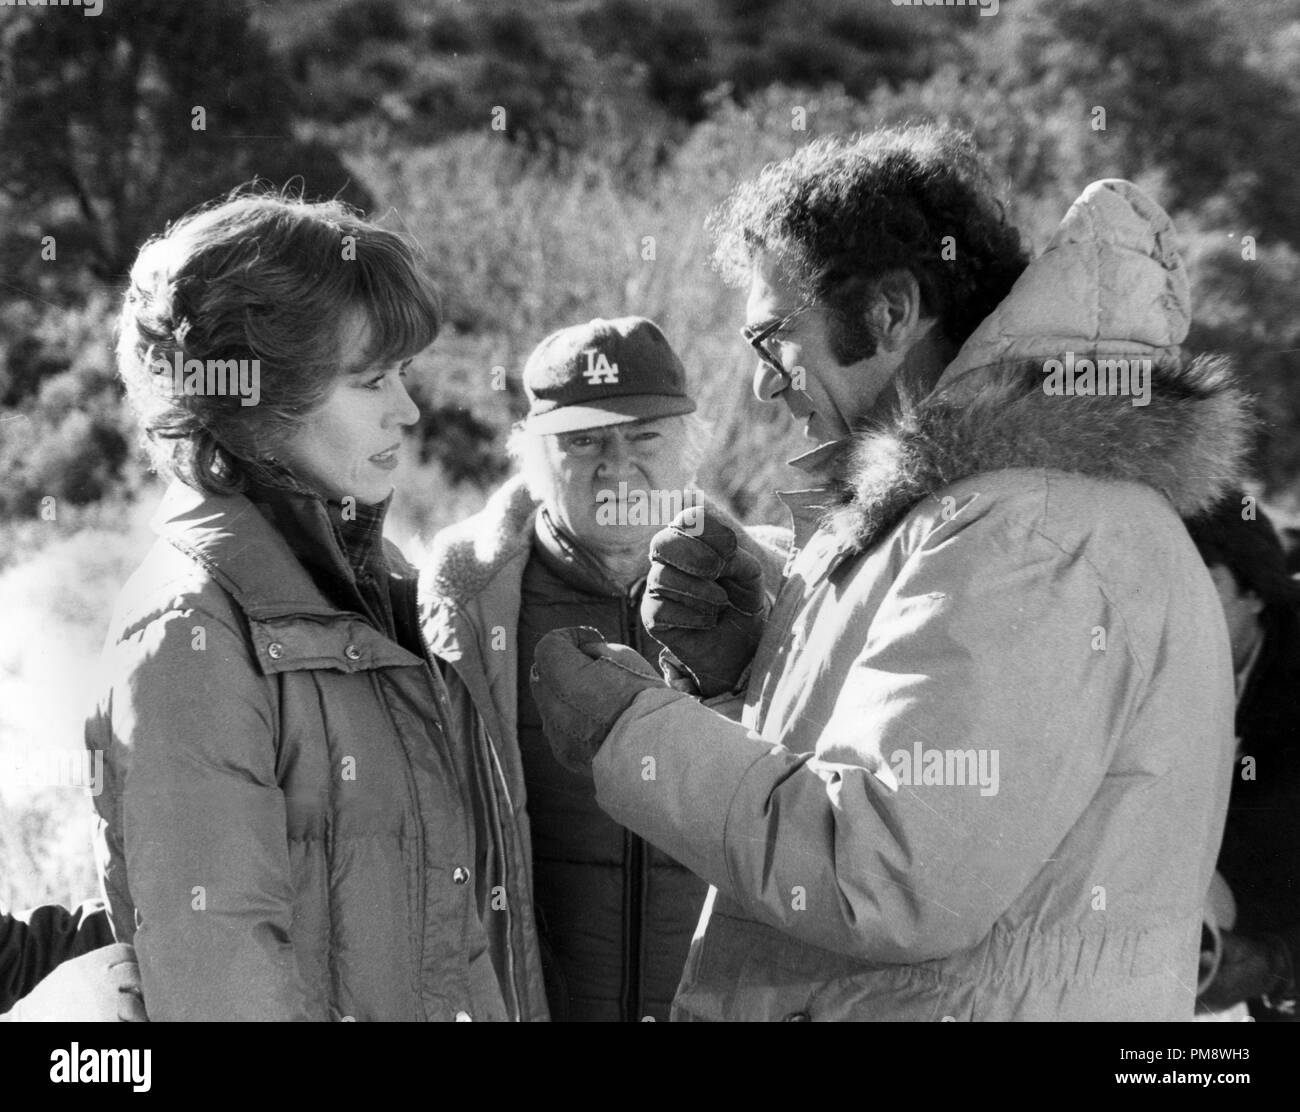 Studio Publicity Still from 'The Electric Horseman' Jane Fonda, Director Sydney Pollack © 1979 Columbia   All Rights Reserved   File Reference # 31718049THA  For Editorial Use Only Stock Photo